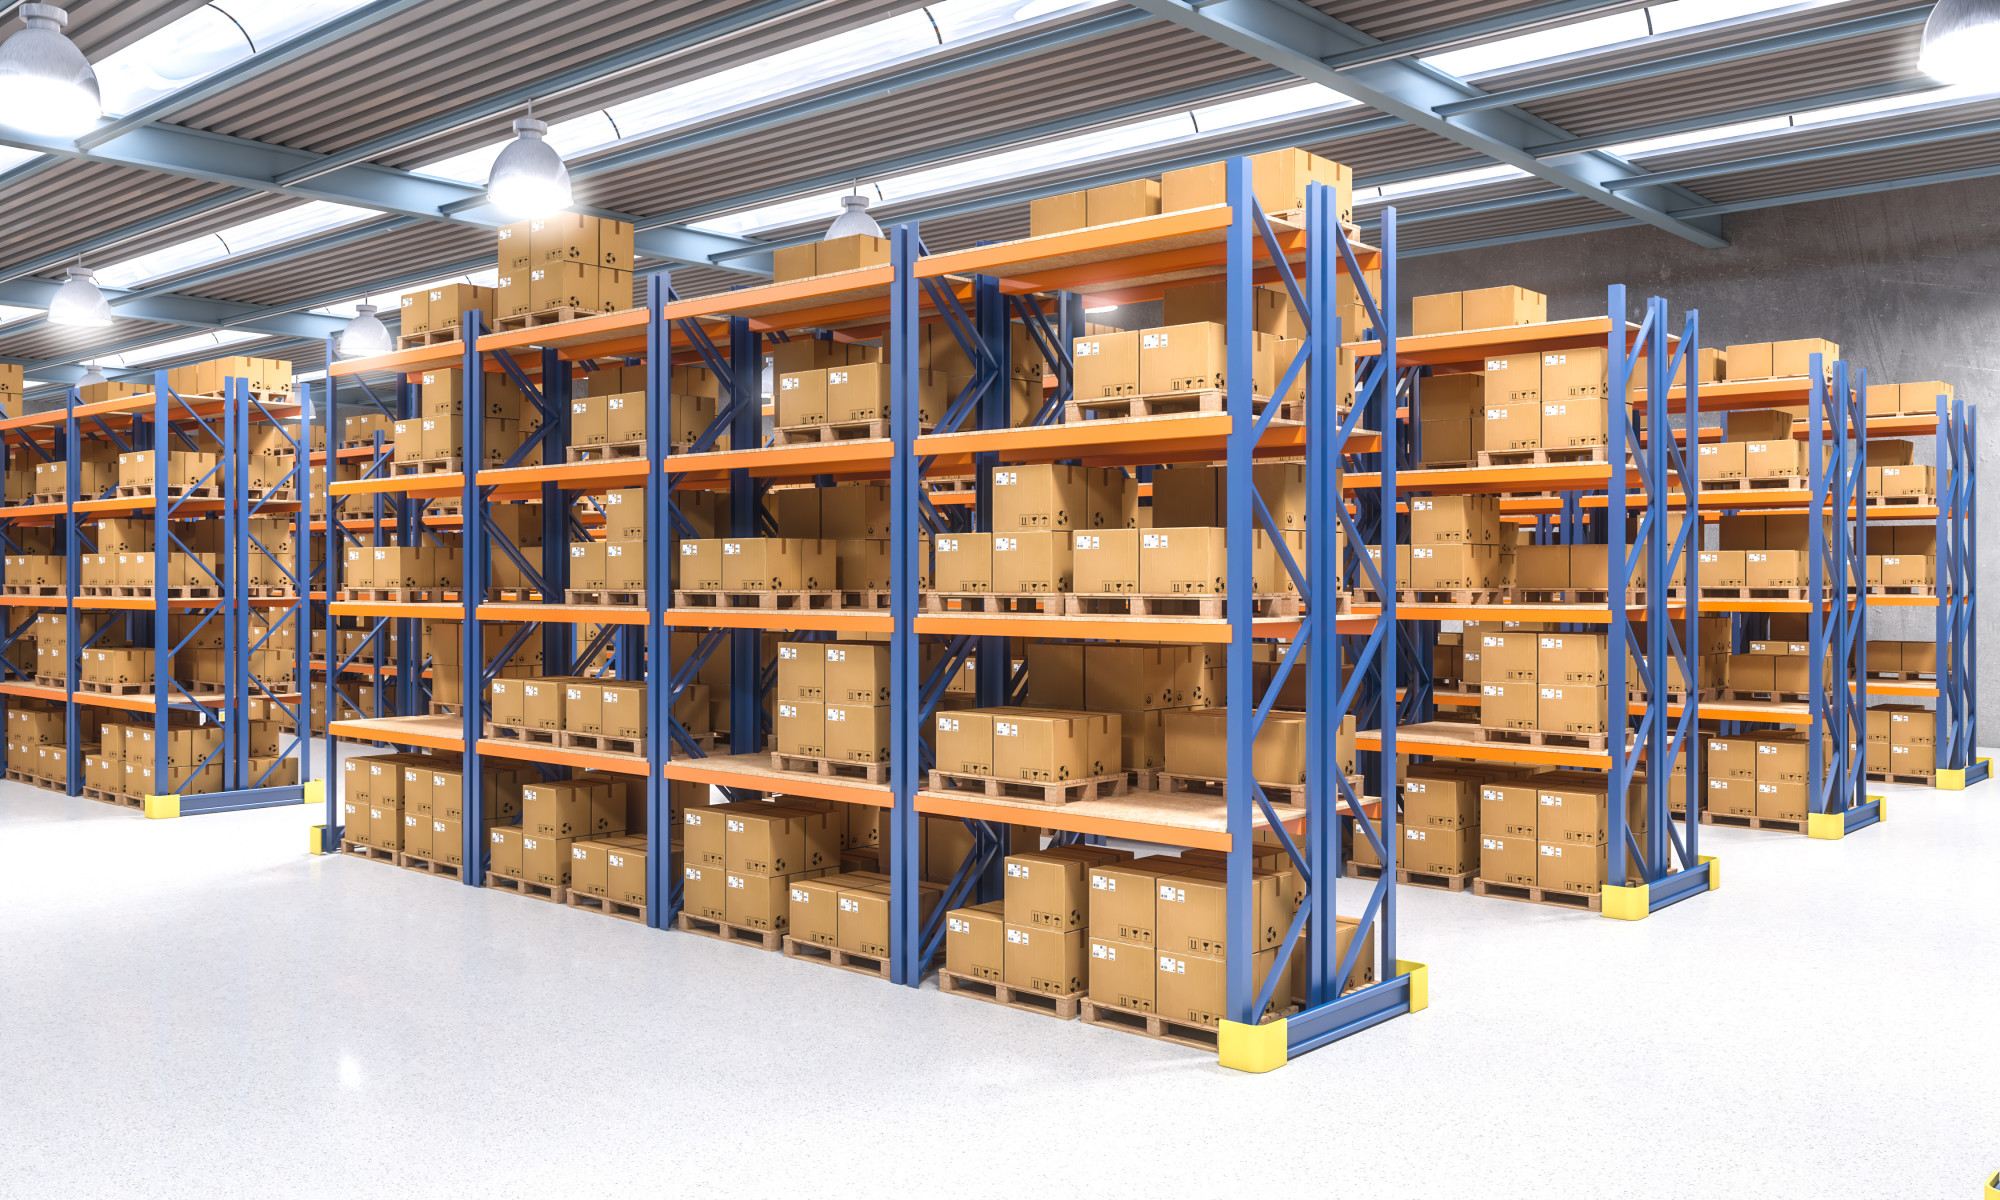 classic warehouse with pallet 3d rendering image